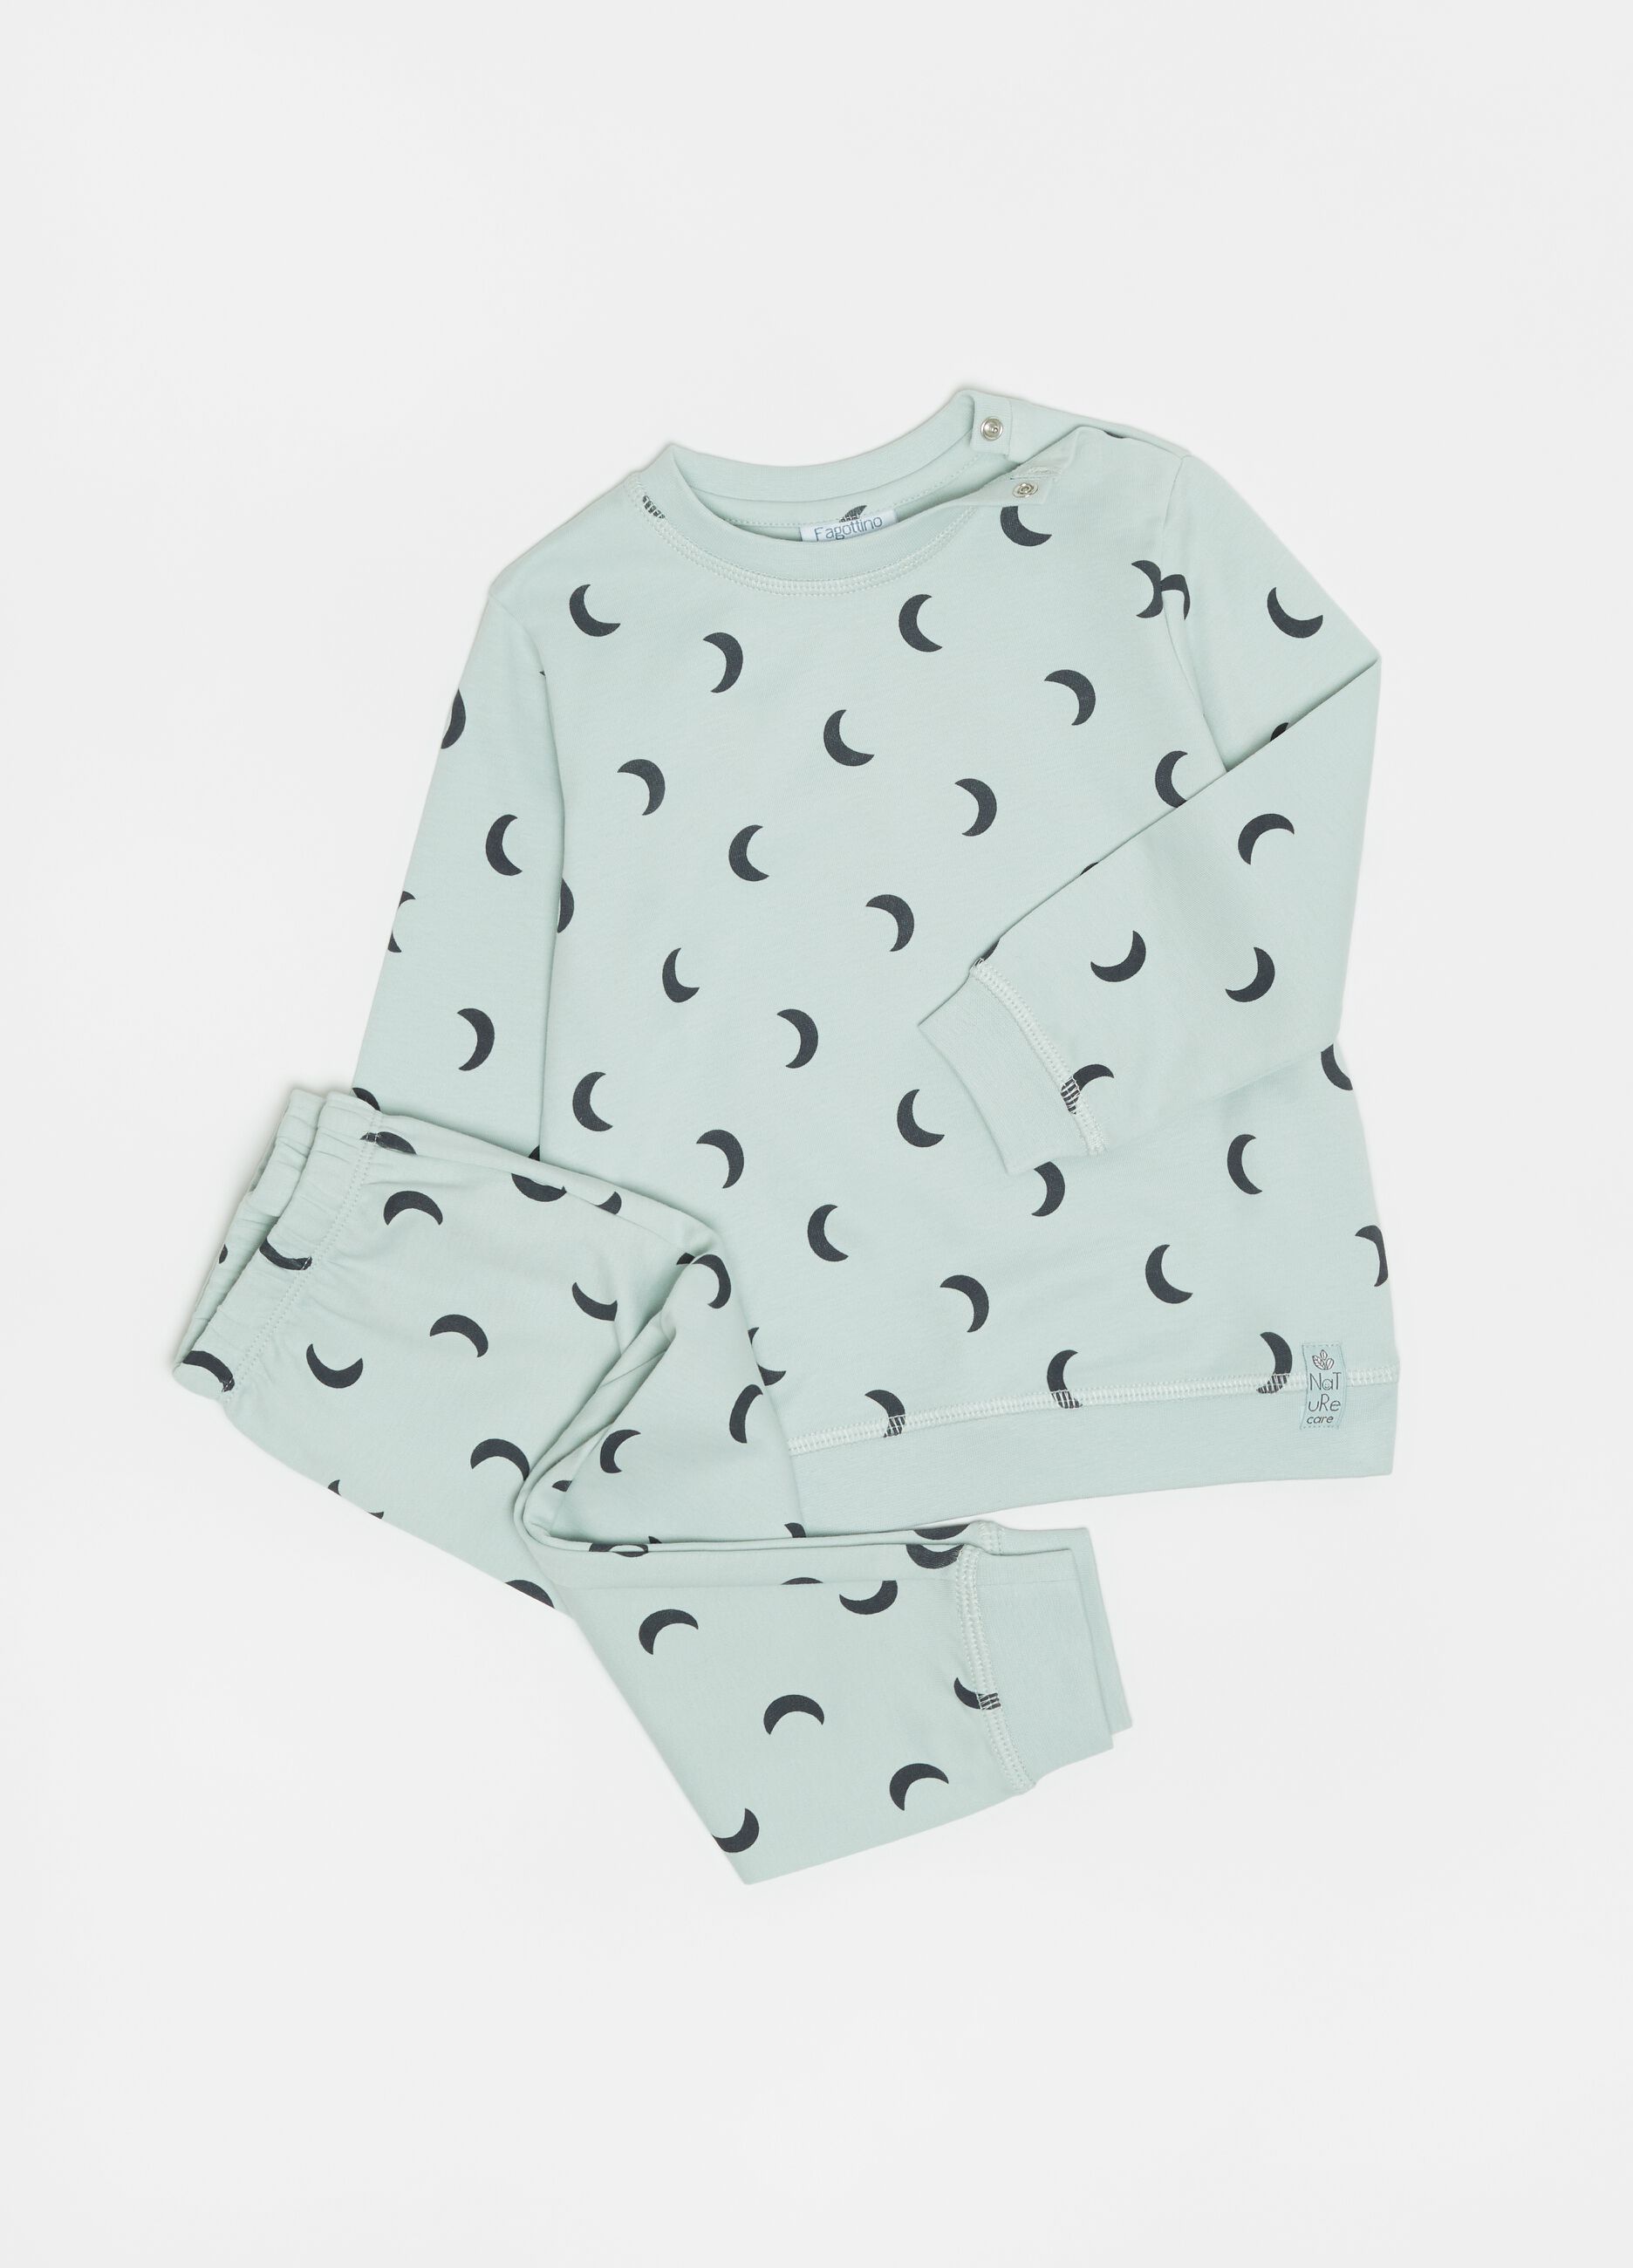 Long pyjamas in 100% cotton with moon pattern